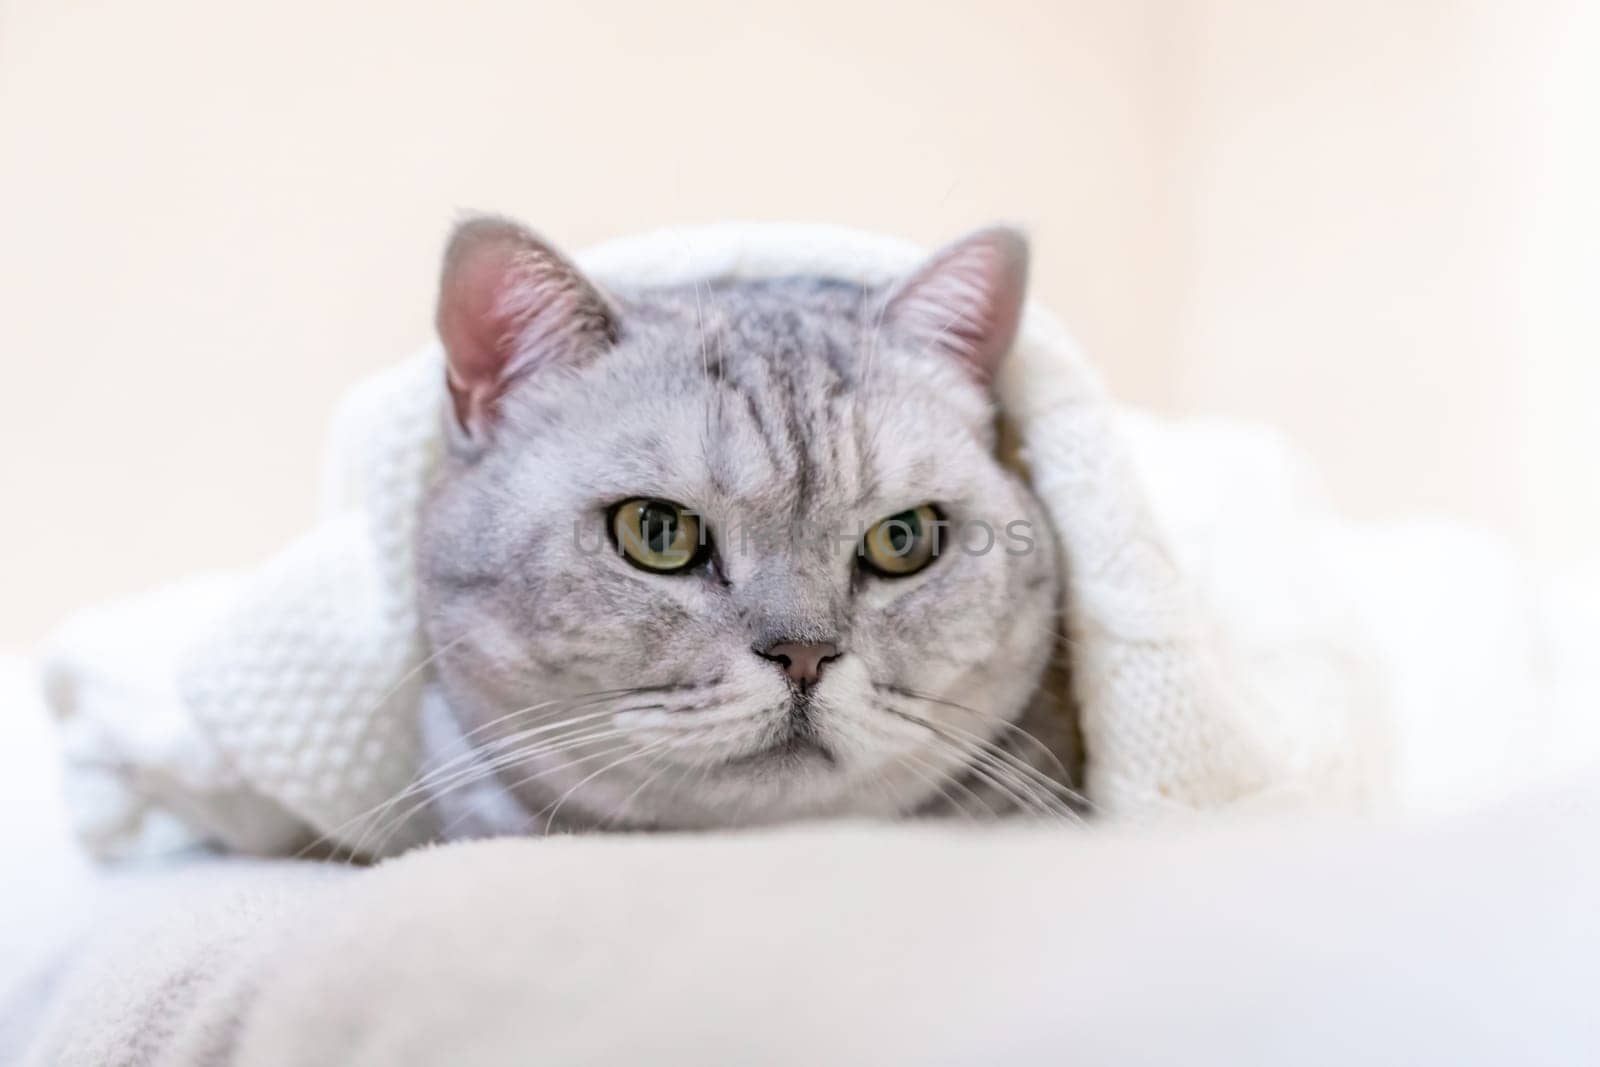 Relaxed Scottish cat wrapped in white blanket muzzle close up. Where: Unspecified location. Comfortable setting. Conveying cat's relaxation in cozy blanket. by Matiunina